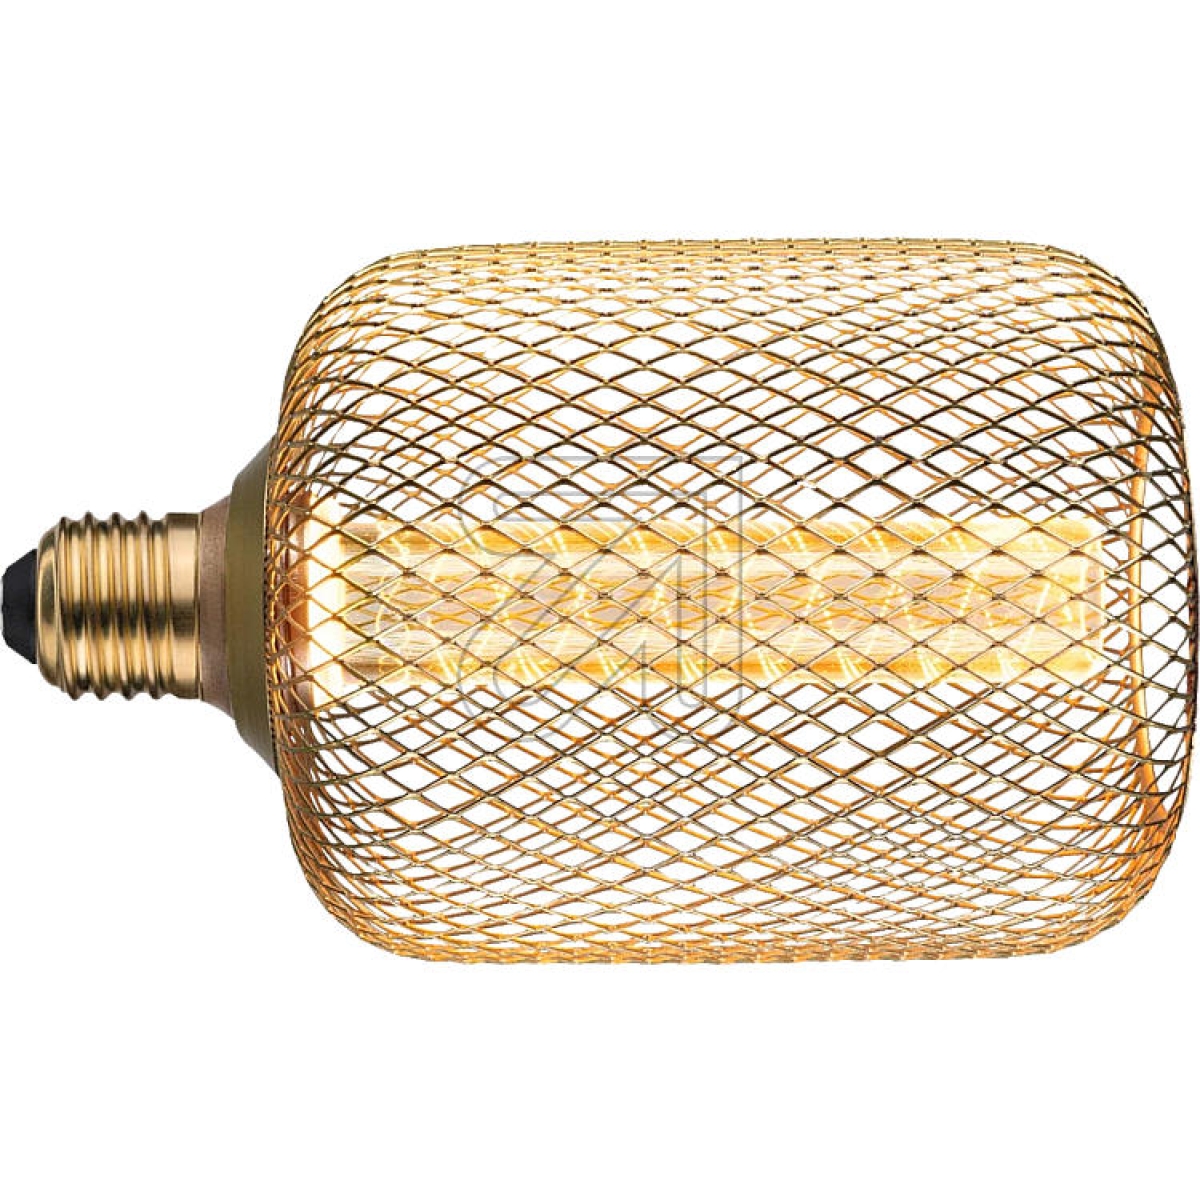 PaulmannLED MG cyl brass spiral E27 200lm 4.2W 1800K 29085Article-No: 541395